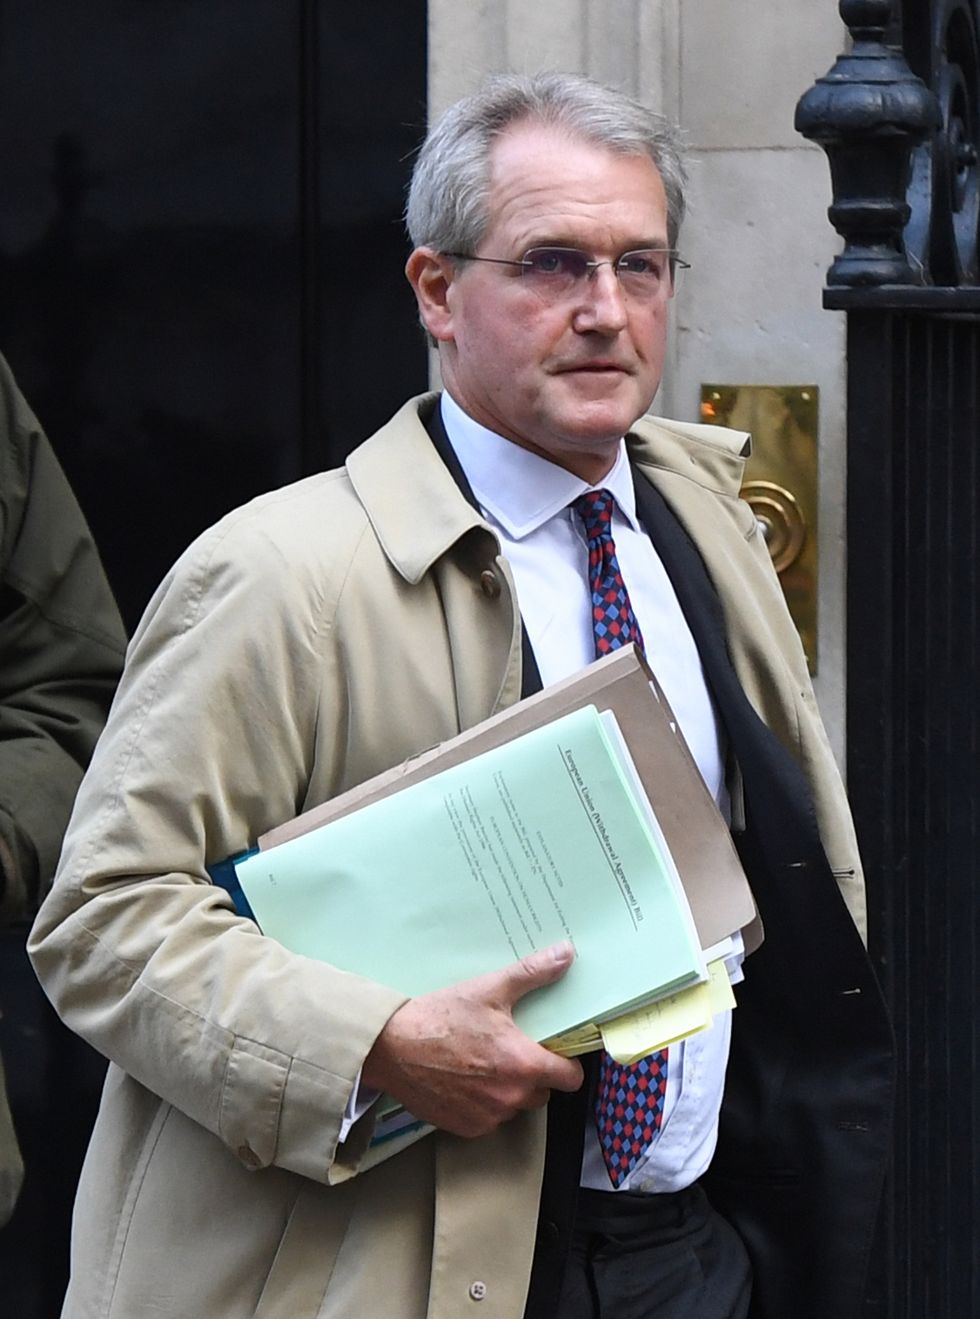 Owen Paterson has resigned as an MP